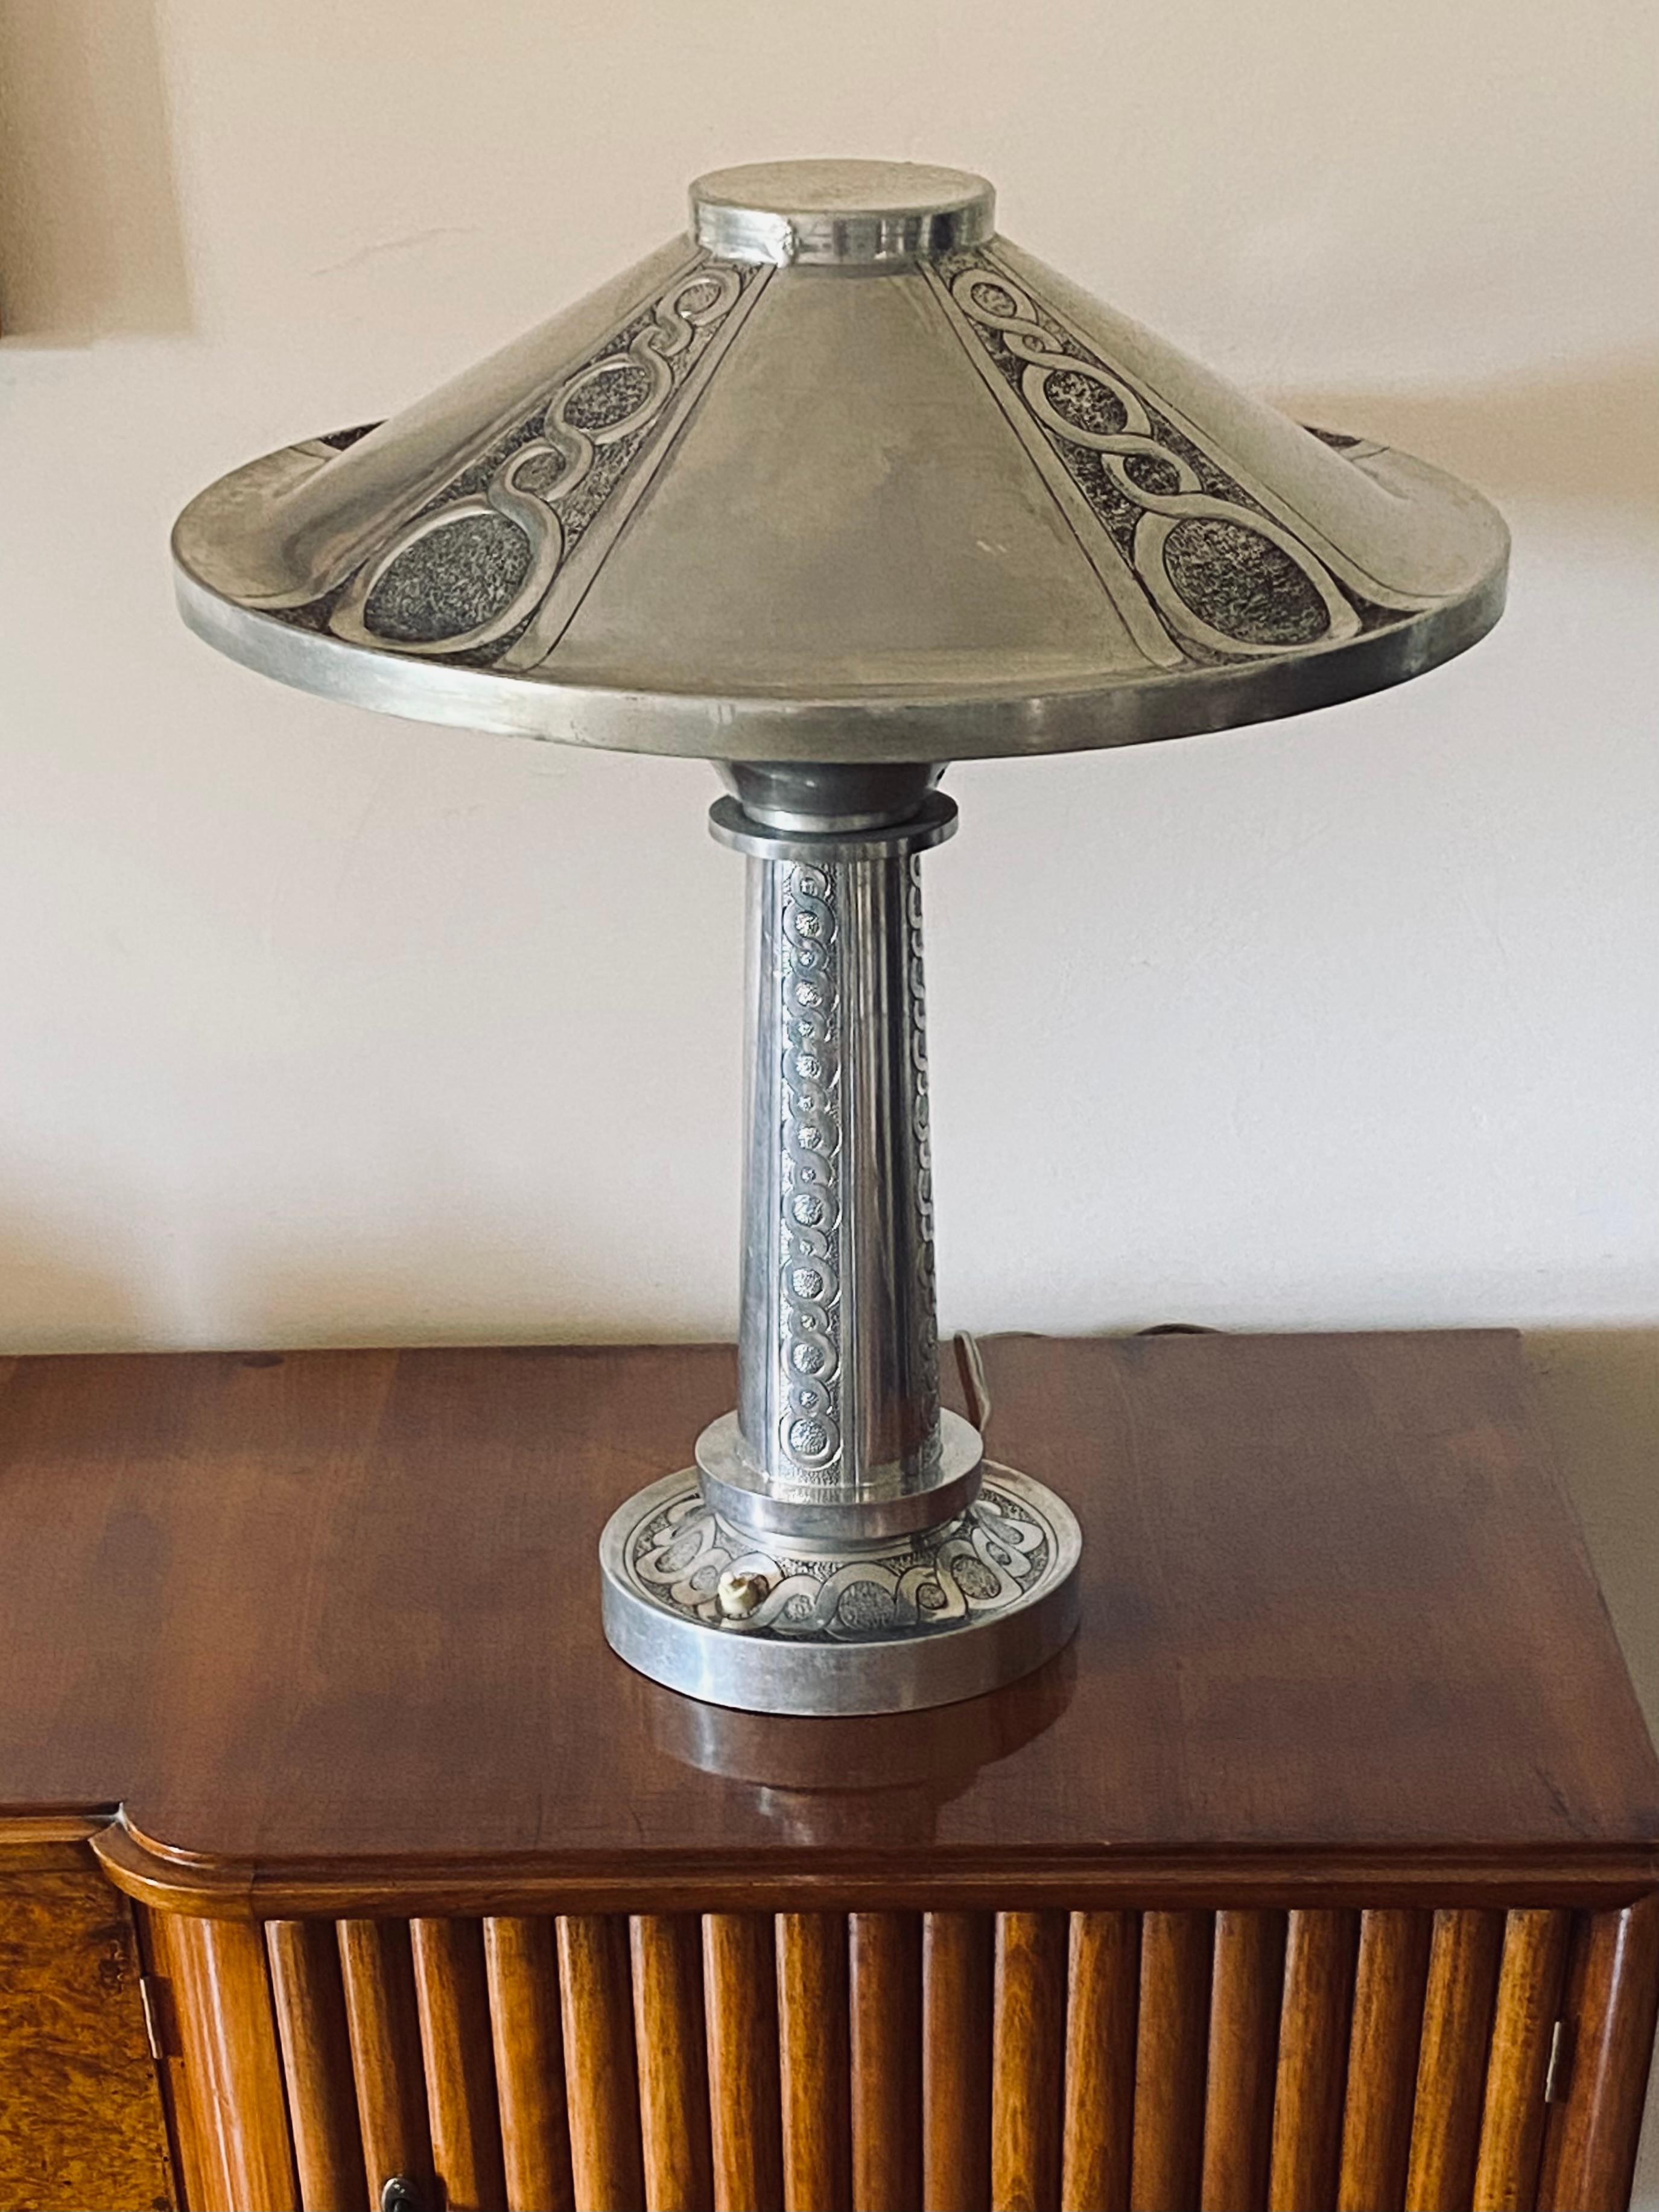 Art Deco monumental embossed Table Lamp

France, ca. 1920s

Highly handcraft decorated. All original lamp base and shade with embossed details.

H 60 cm

Diam. 50 cm

Conditions: excellent consistent with age and use. In working conditions